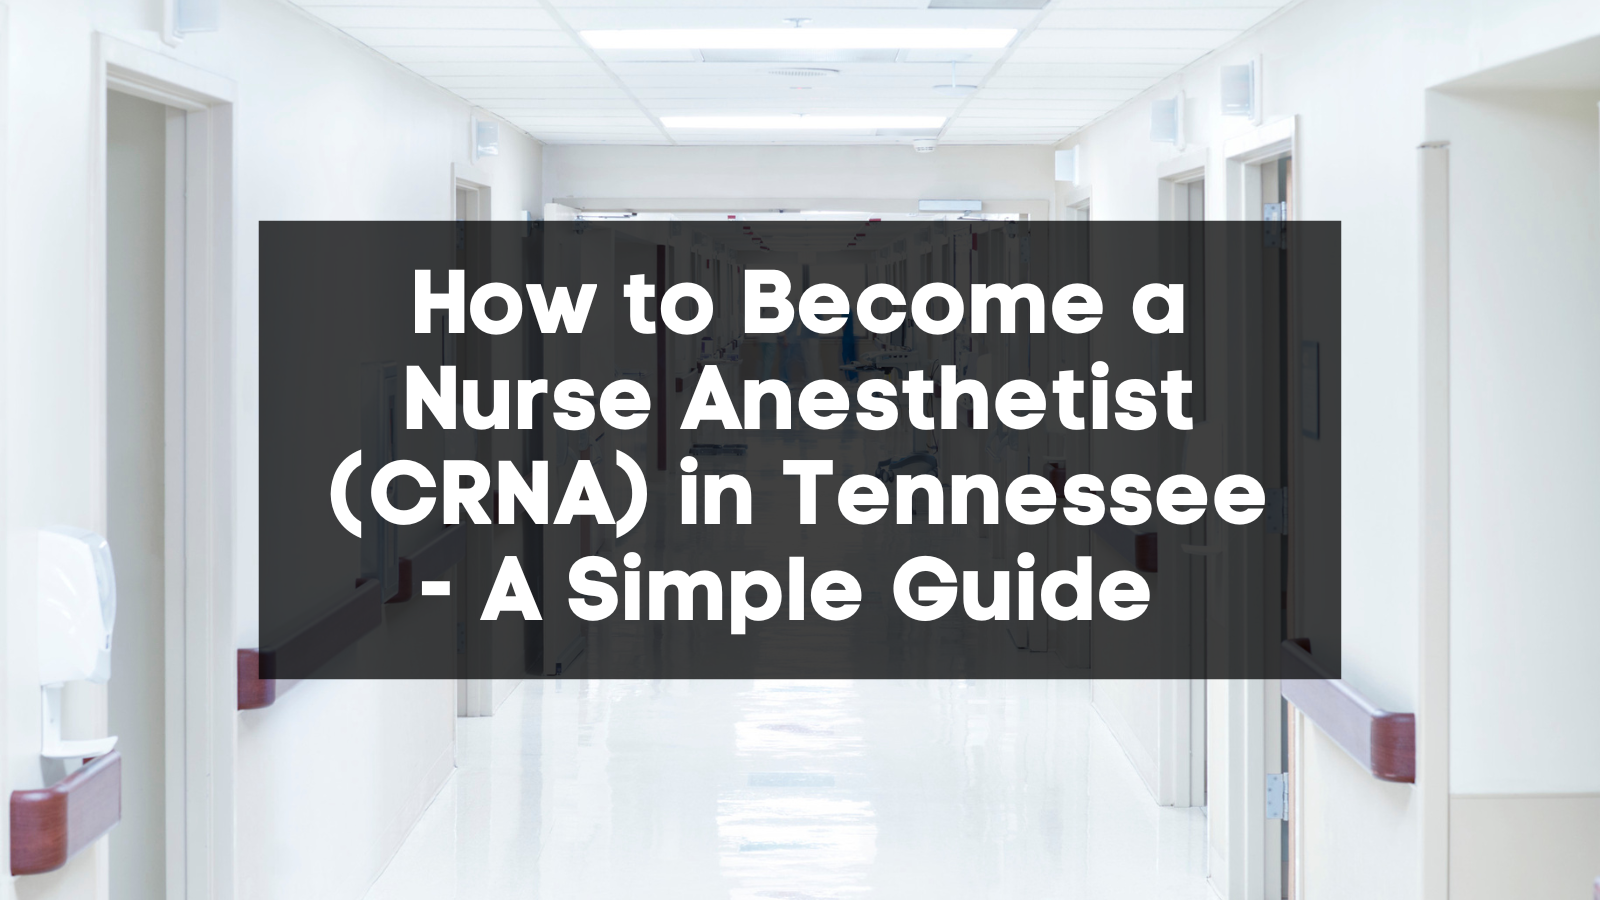 How to Become a Nurse Anesthetist (CRNA) in Tennessee featured image